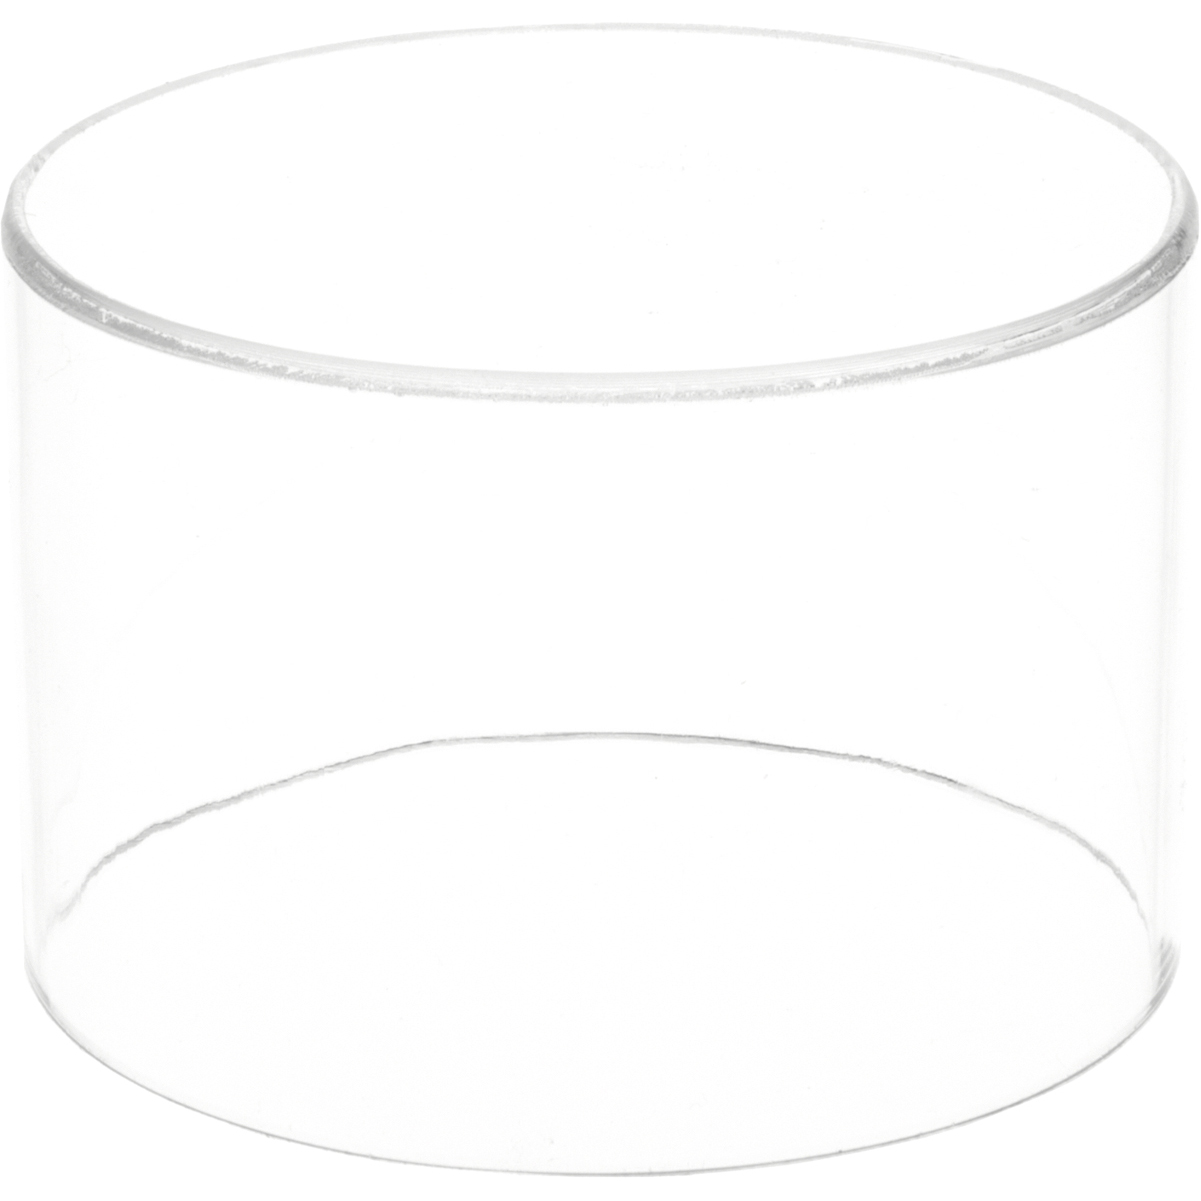 Plymor Clear Acrylic Beveled Round Display Base 5" W x 5" D x 1" H Pack of 3 